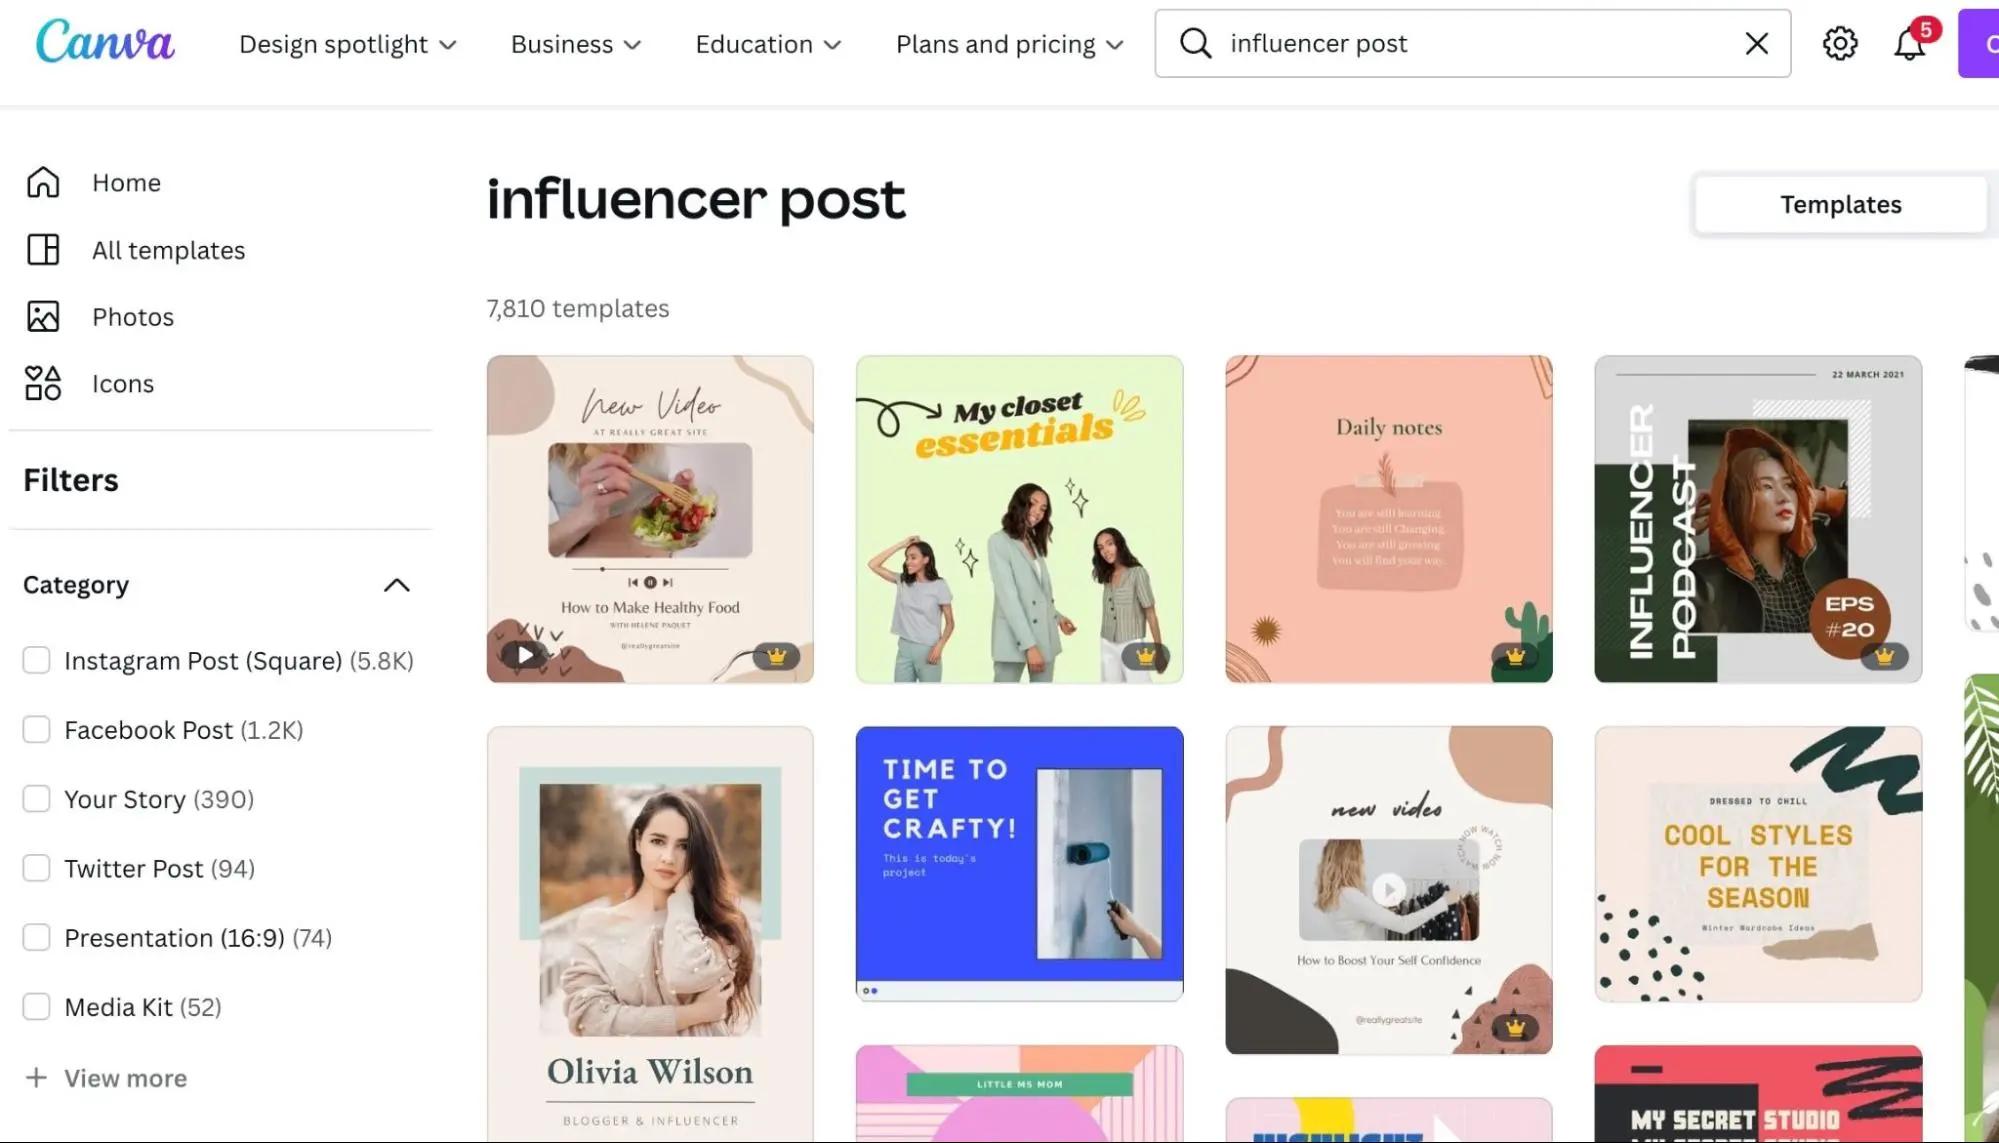 Screenshot of Canva interface showing results for "influencer post" search